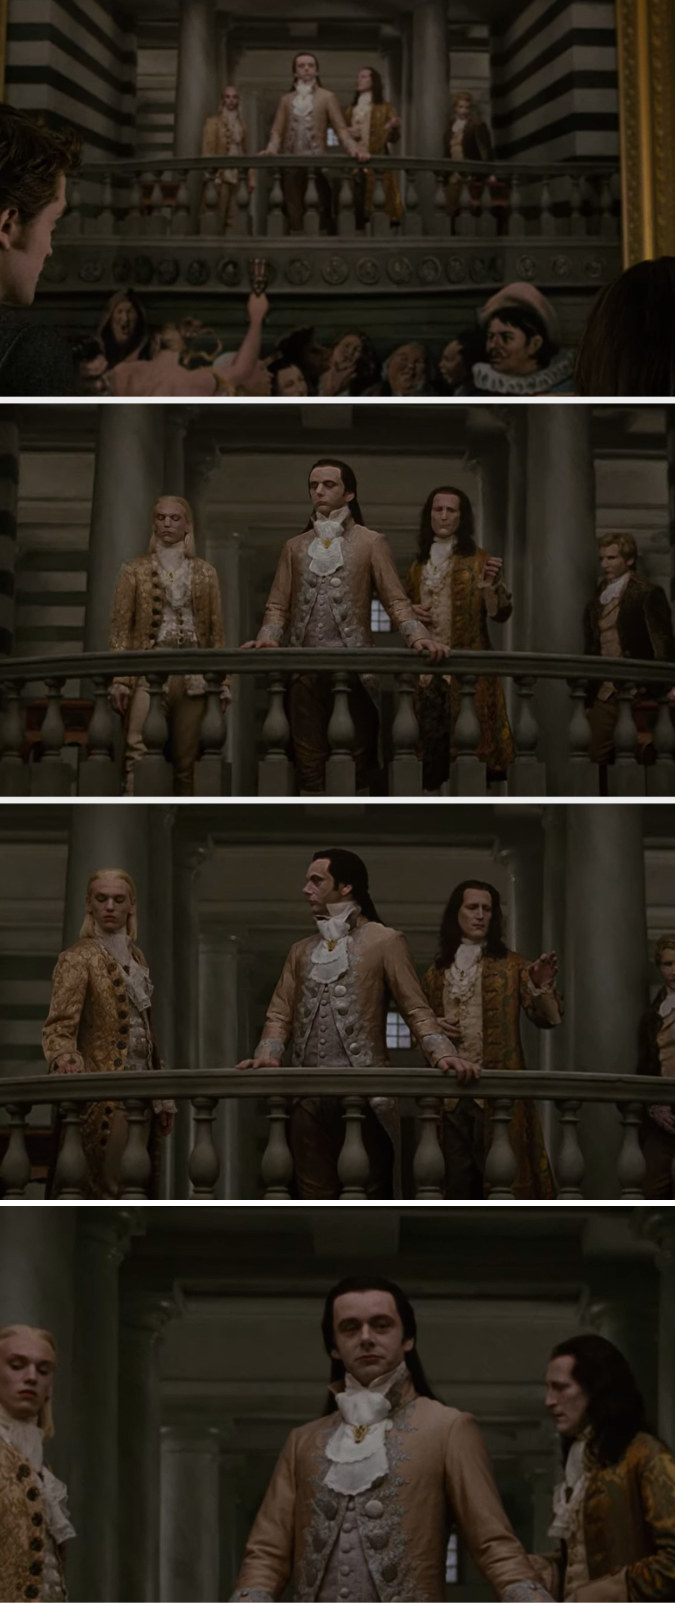 In the New Moon movie, the people in painting of the Volturi start to move and it transitions into the real characters